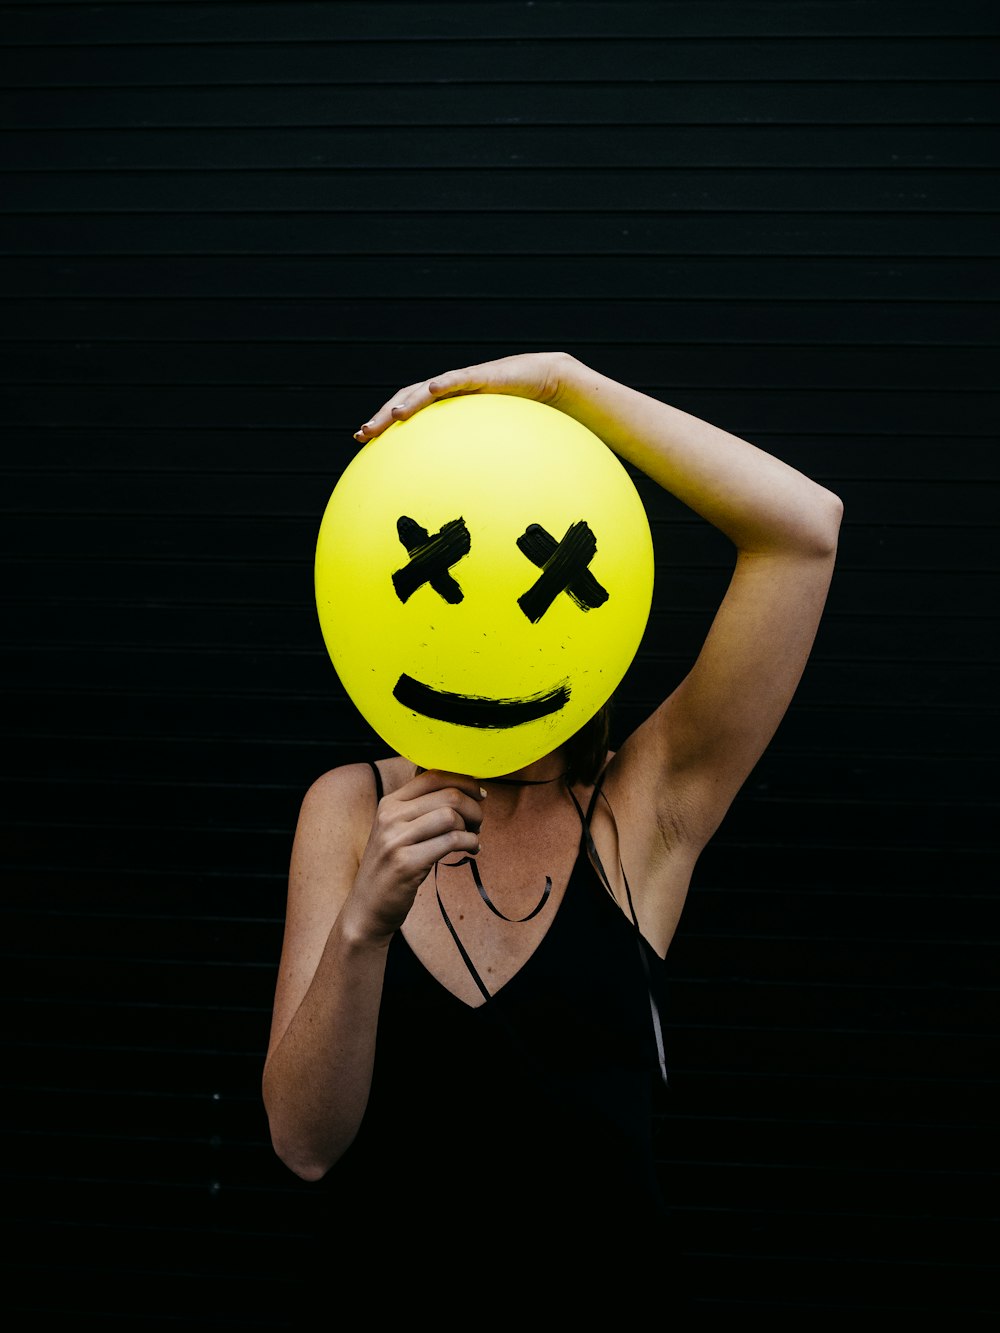 500+ Smiley Face Pictures | Download Free Images on Unsplash